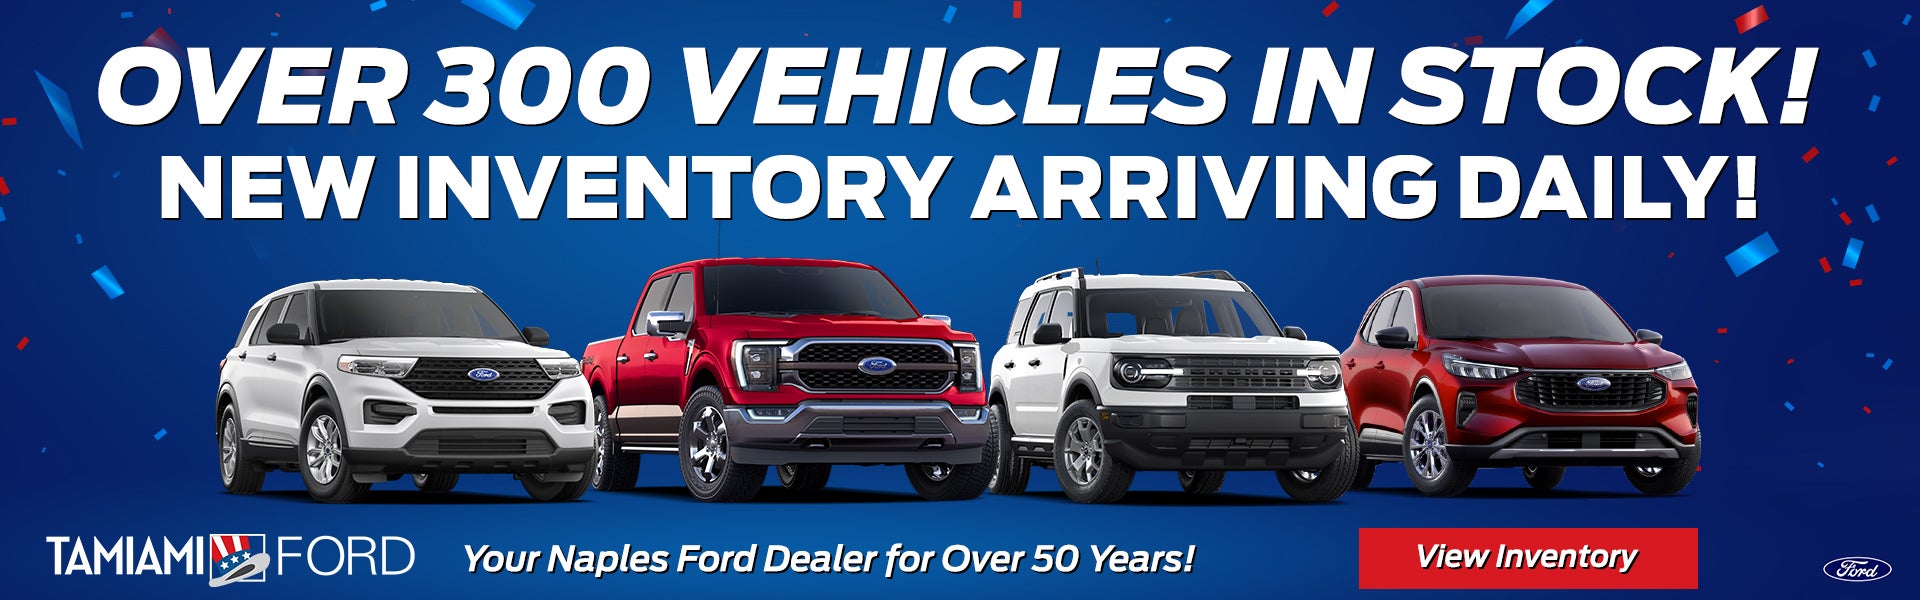 over 300 vehicles in stock! 